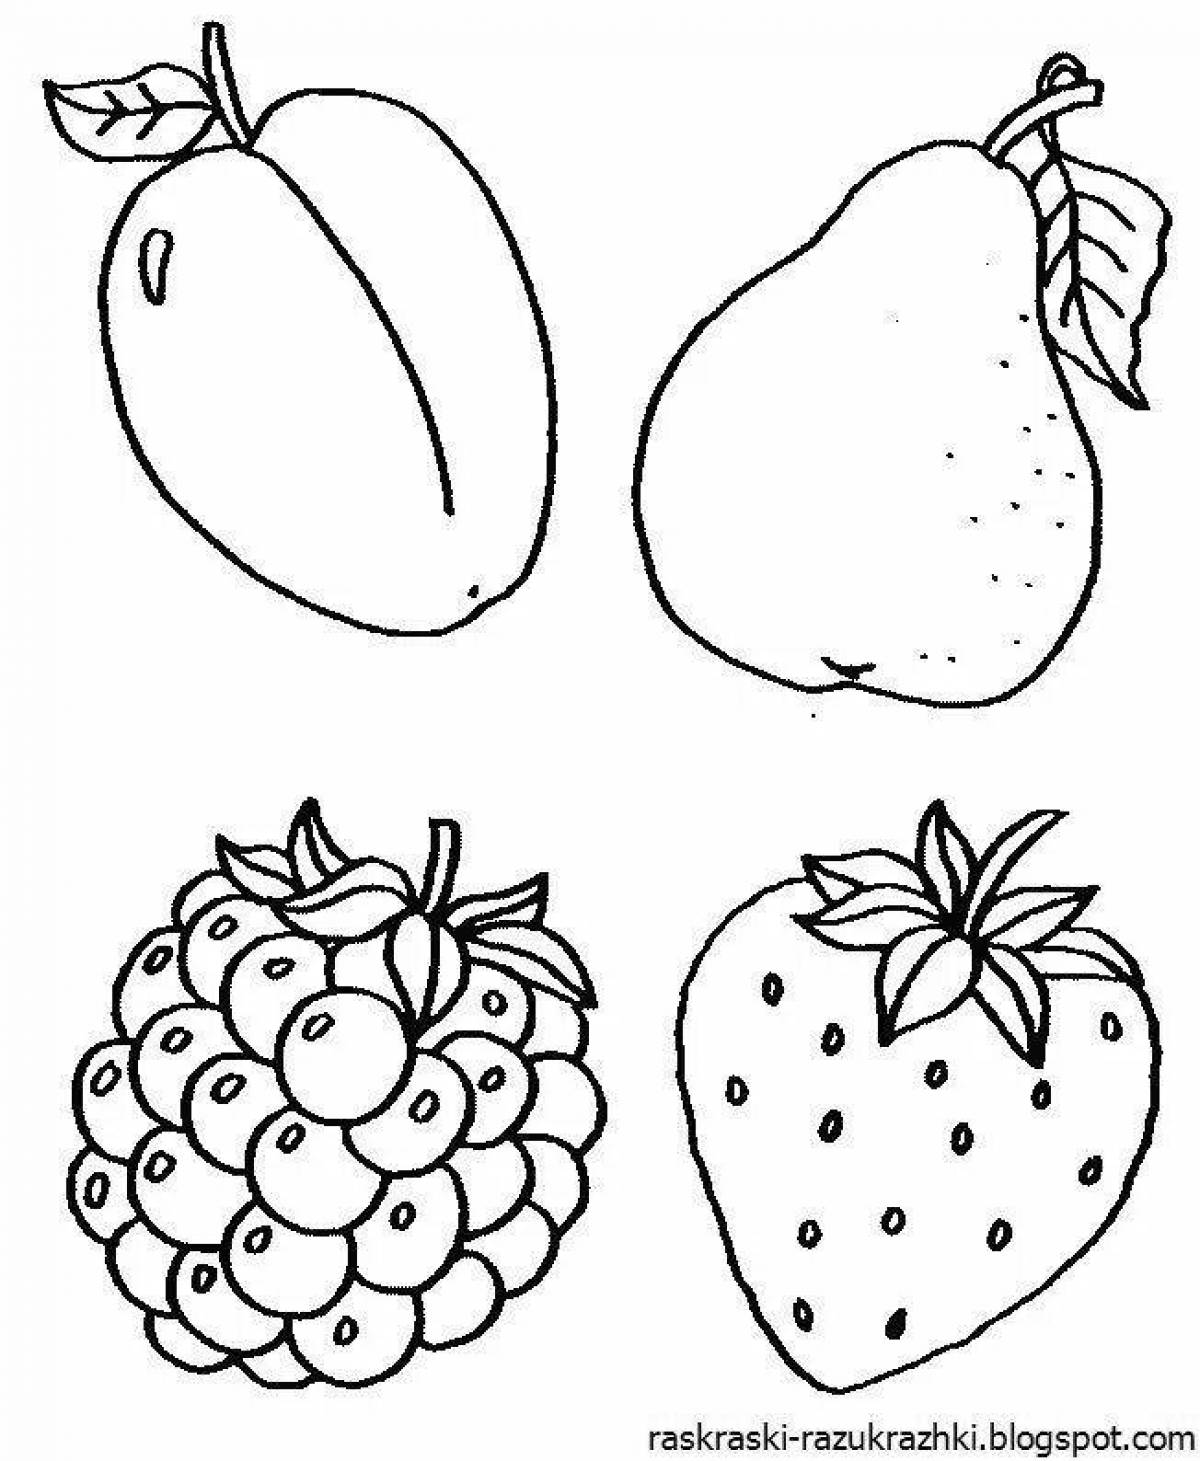 Humorous fruit and vegetable coloring book